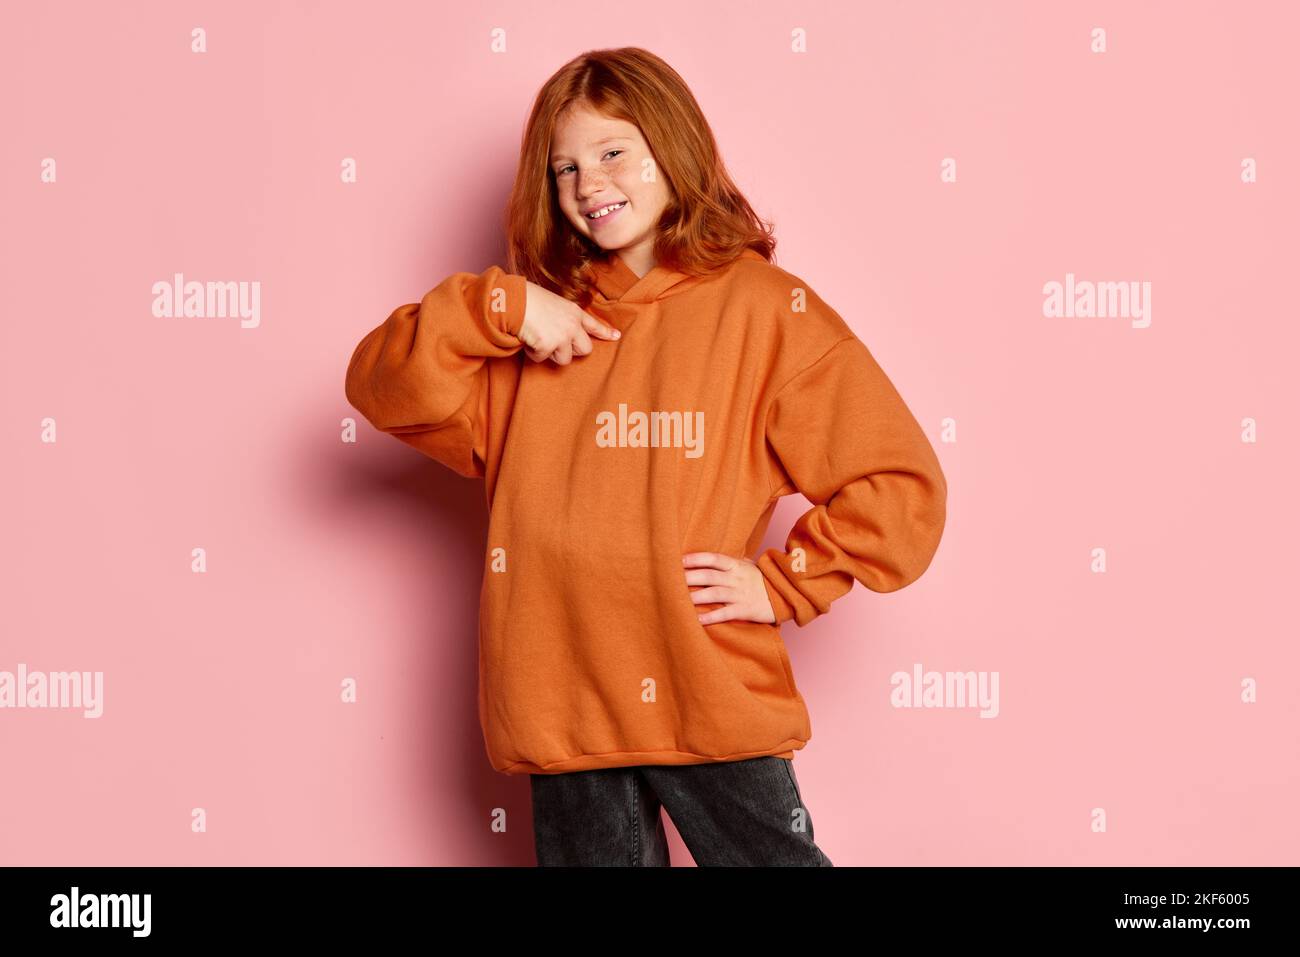 Smiling teen girl, emotional kid with long red hair and freckles posing isolated over pink background. Concept of children emotions, casual sports Stock Photo